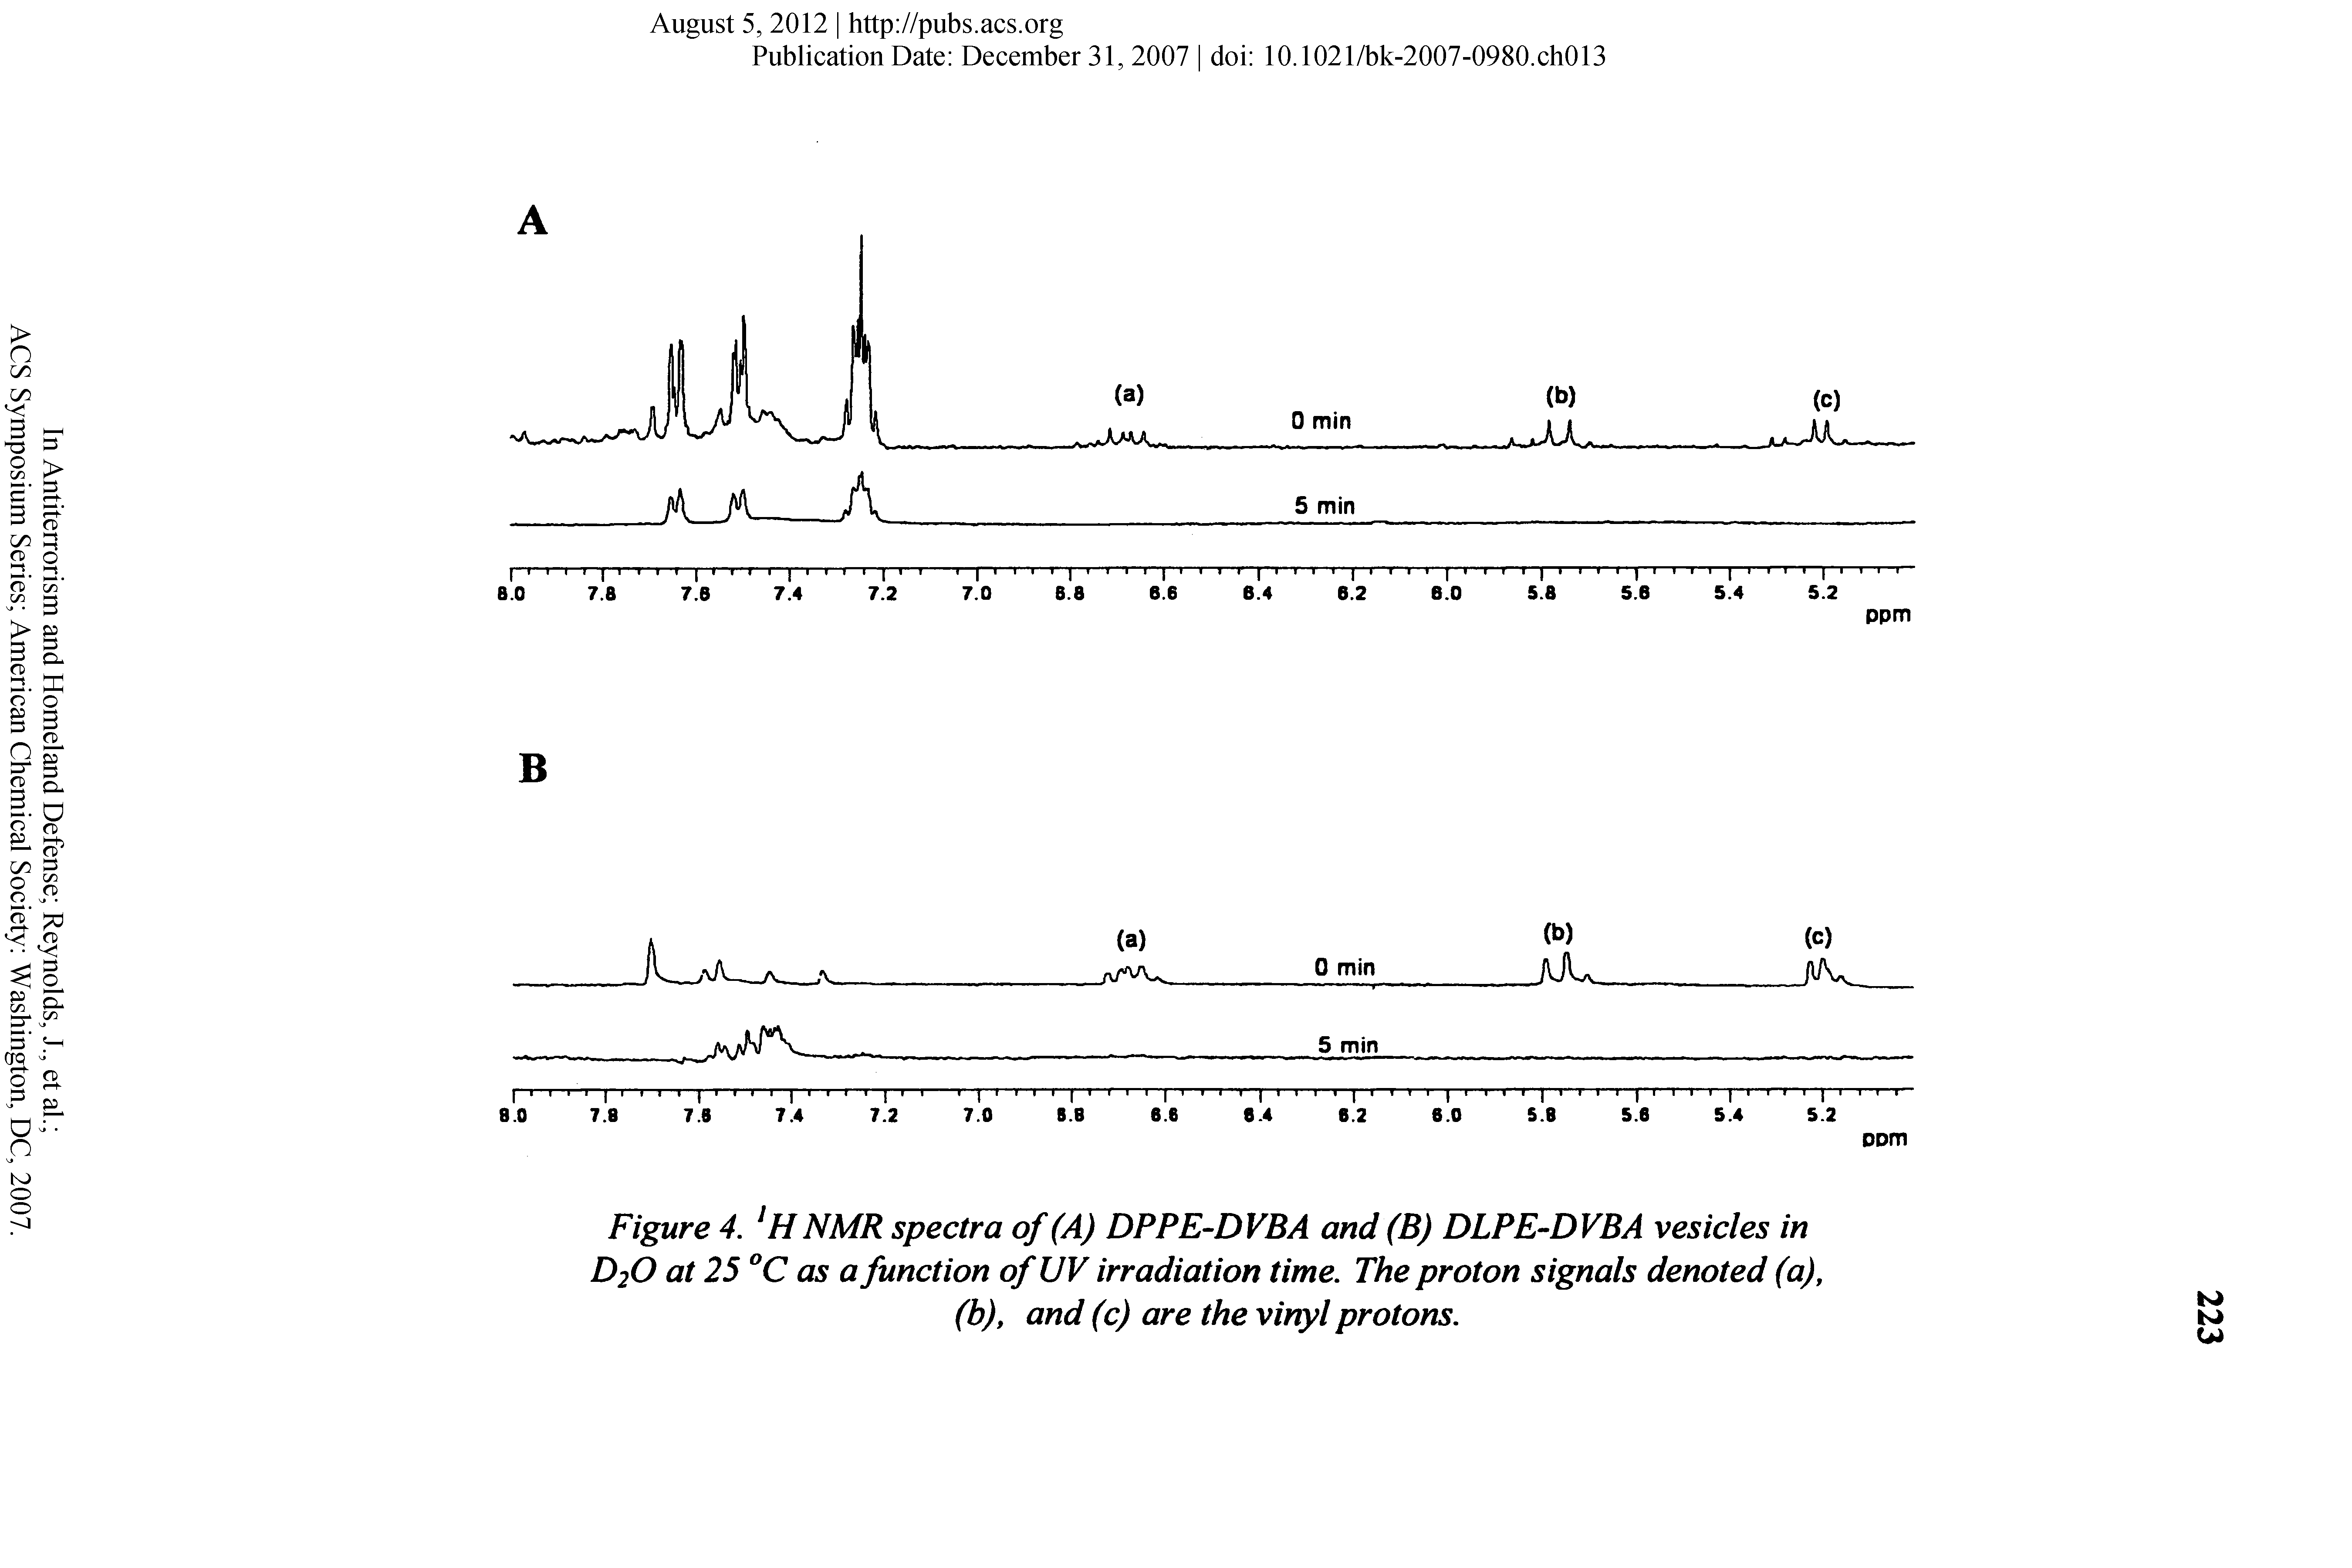 Figure 4. HNMR spectra of (A) DPPE-DVBA and (B) DLPE-DVBA vesicles in D2O at 25 as a function ofUV irradiation time. The proton signals denoted (a), (b), and (c) are the vinyl protons.